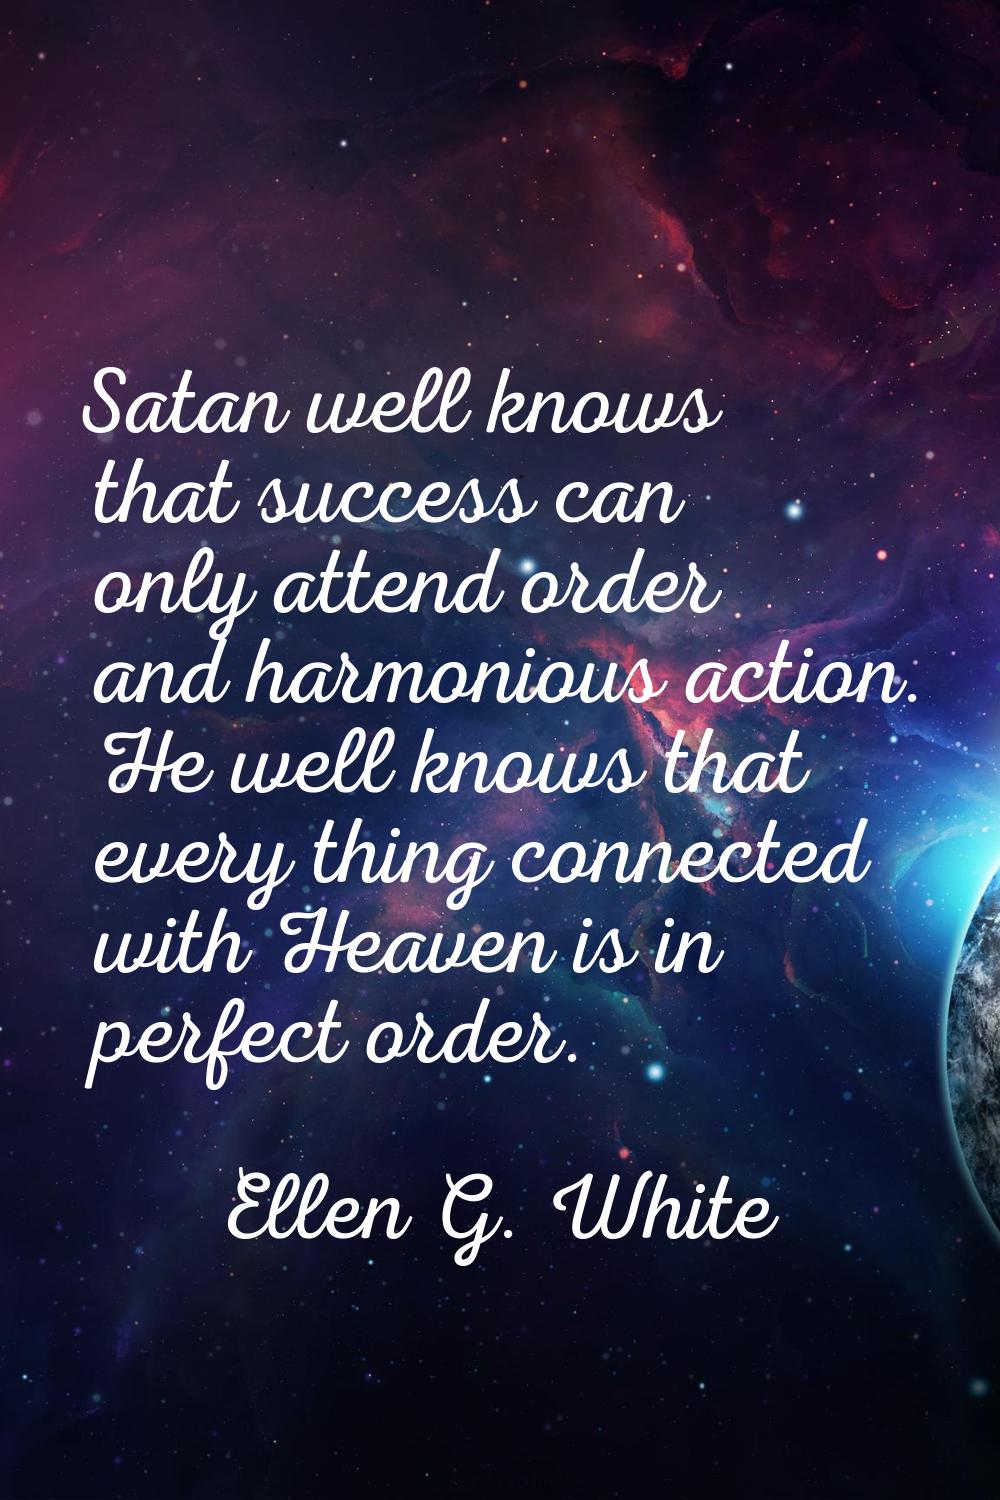 Satan well knows that success can only attend order and harmonious action. He well knows that every